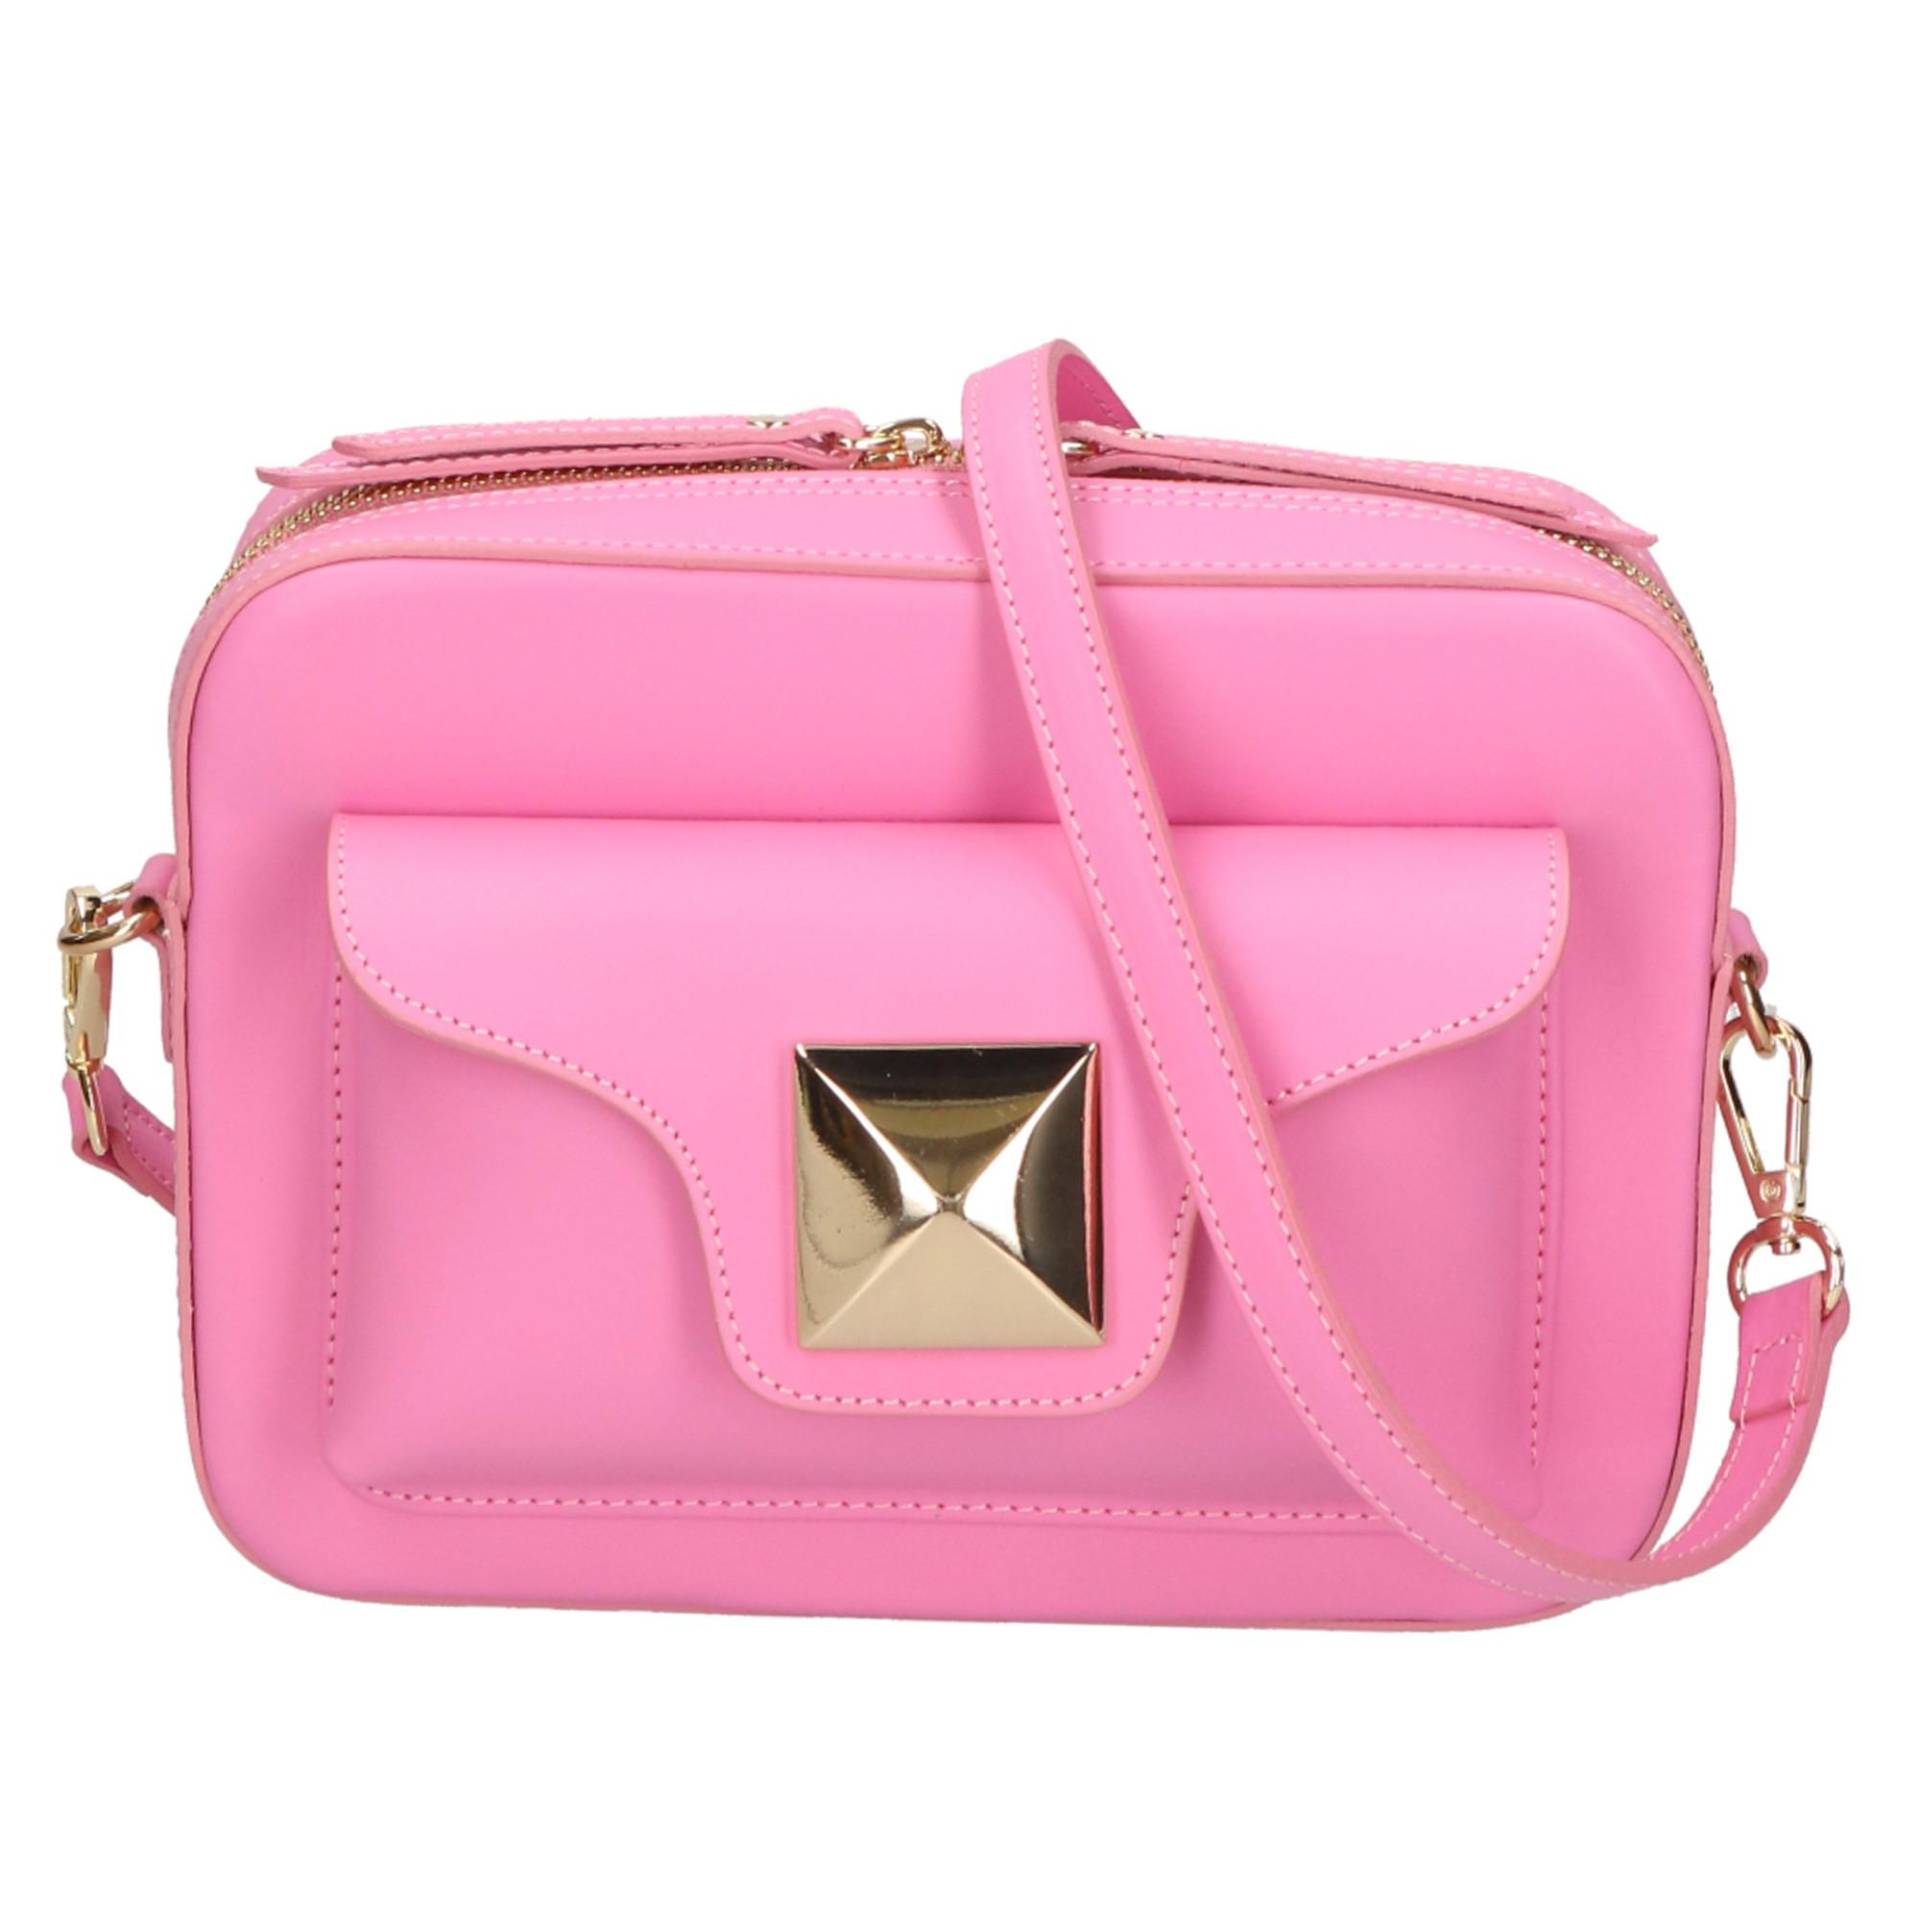 Umhängetasche Women's Single-compartment Bag With Removable Shoulder Strap In Wrinkled Leather. Italian Handcrafted Product. Made In Italy Damen Pink ONE SIZE von Gave Lux